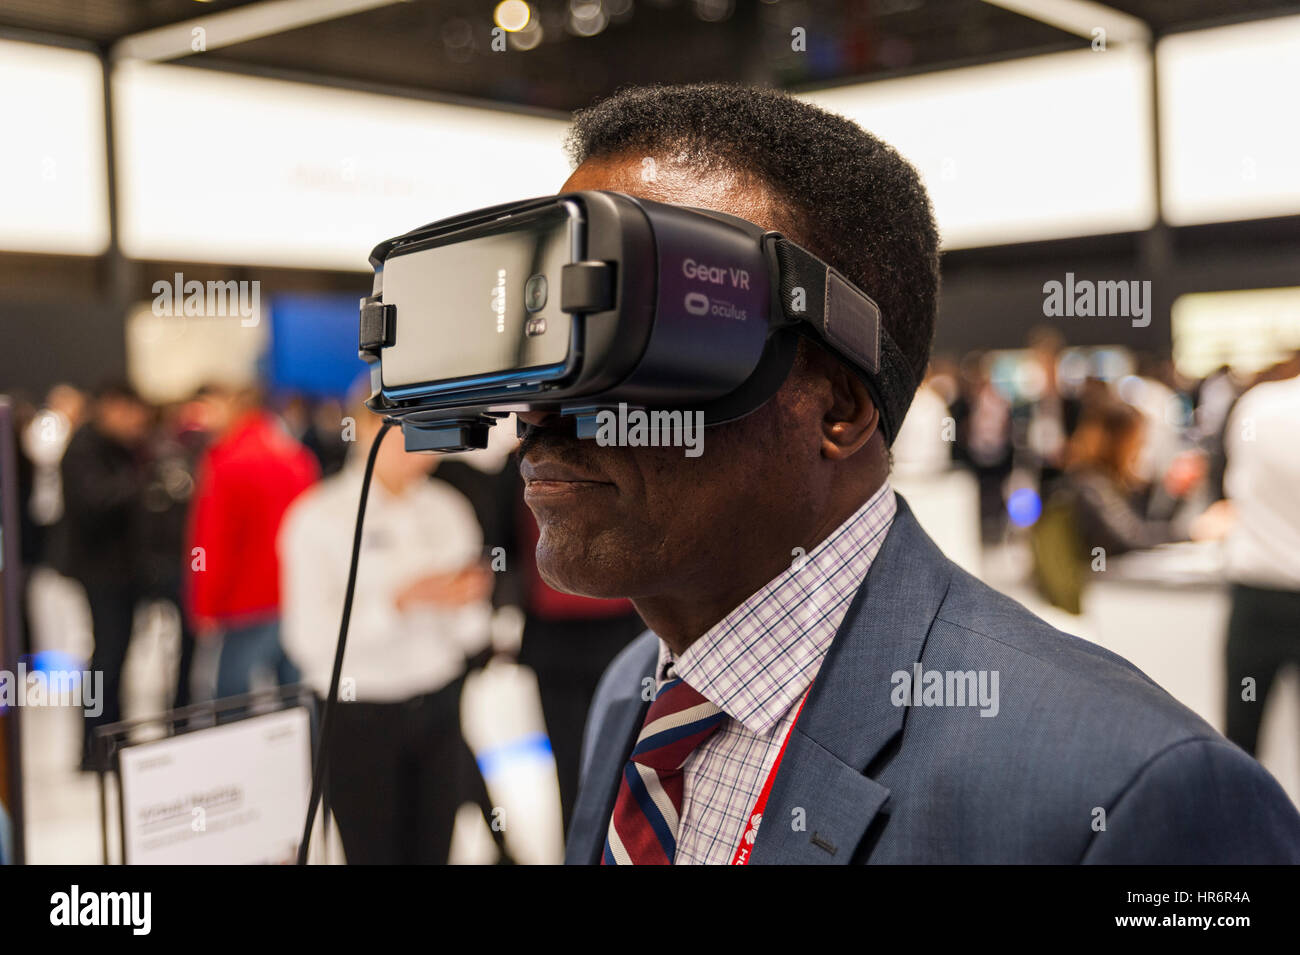 Barcelona, Spain. 27th Feb, 2017. Visitor testing a Samsung Gear VR glasses during the Mobile World Congress wireless show in Barcelona. The annual Mobile World Congress hosts some of the world's largest communications companies, with many unveiling their latest phones and wearables gadgets. Credit: Charlie Perez/Alamy Live News Stock Photo